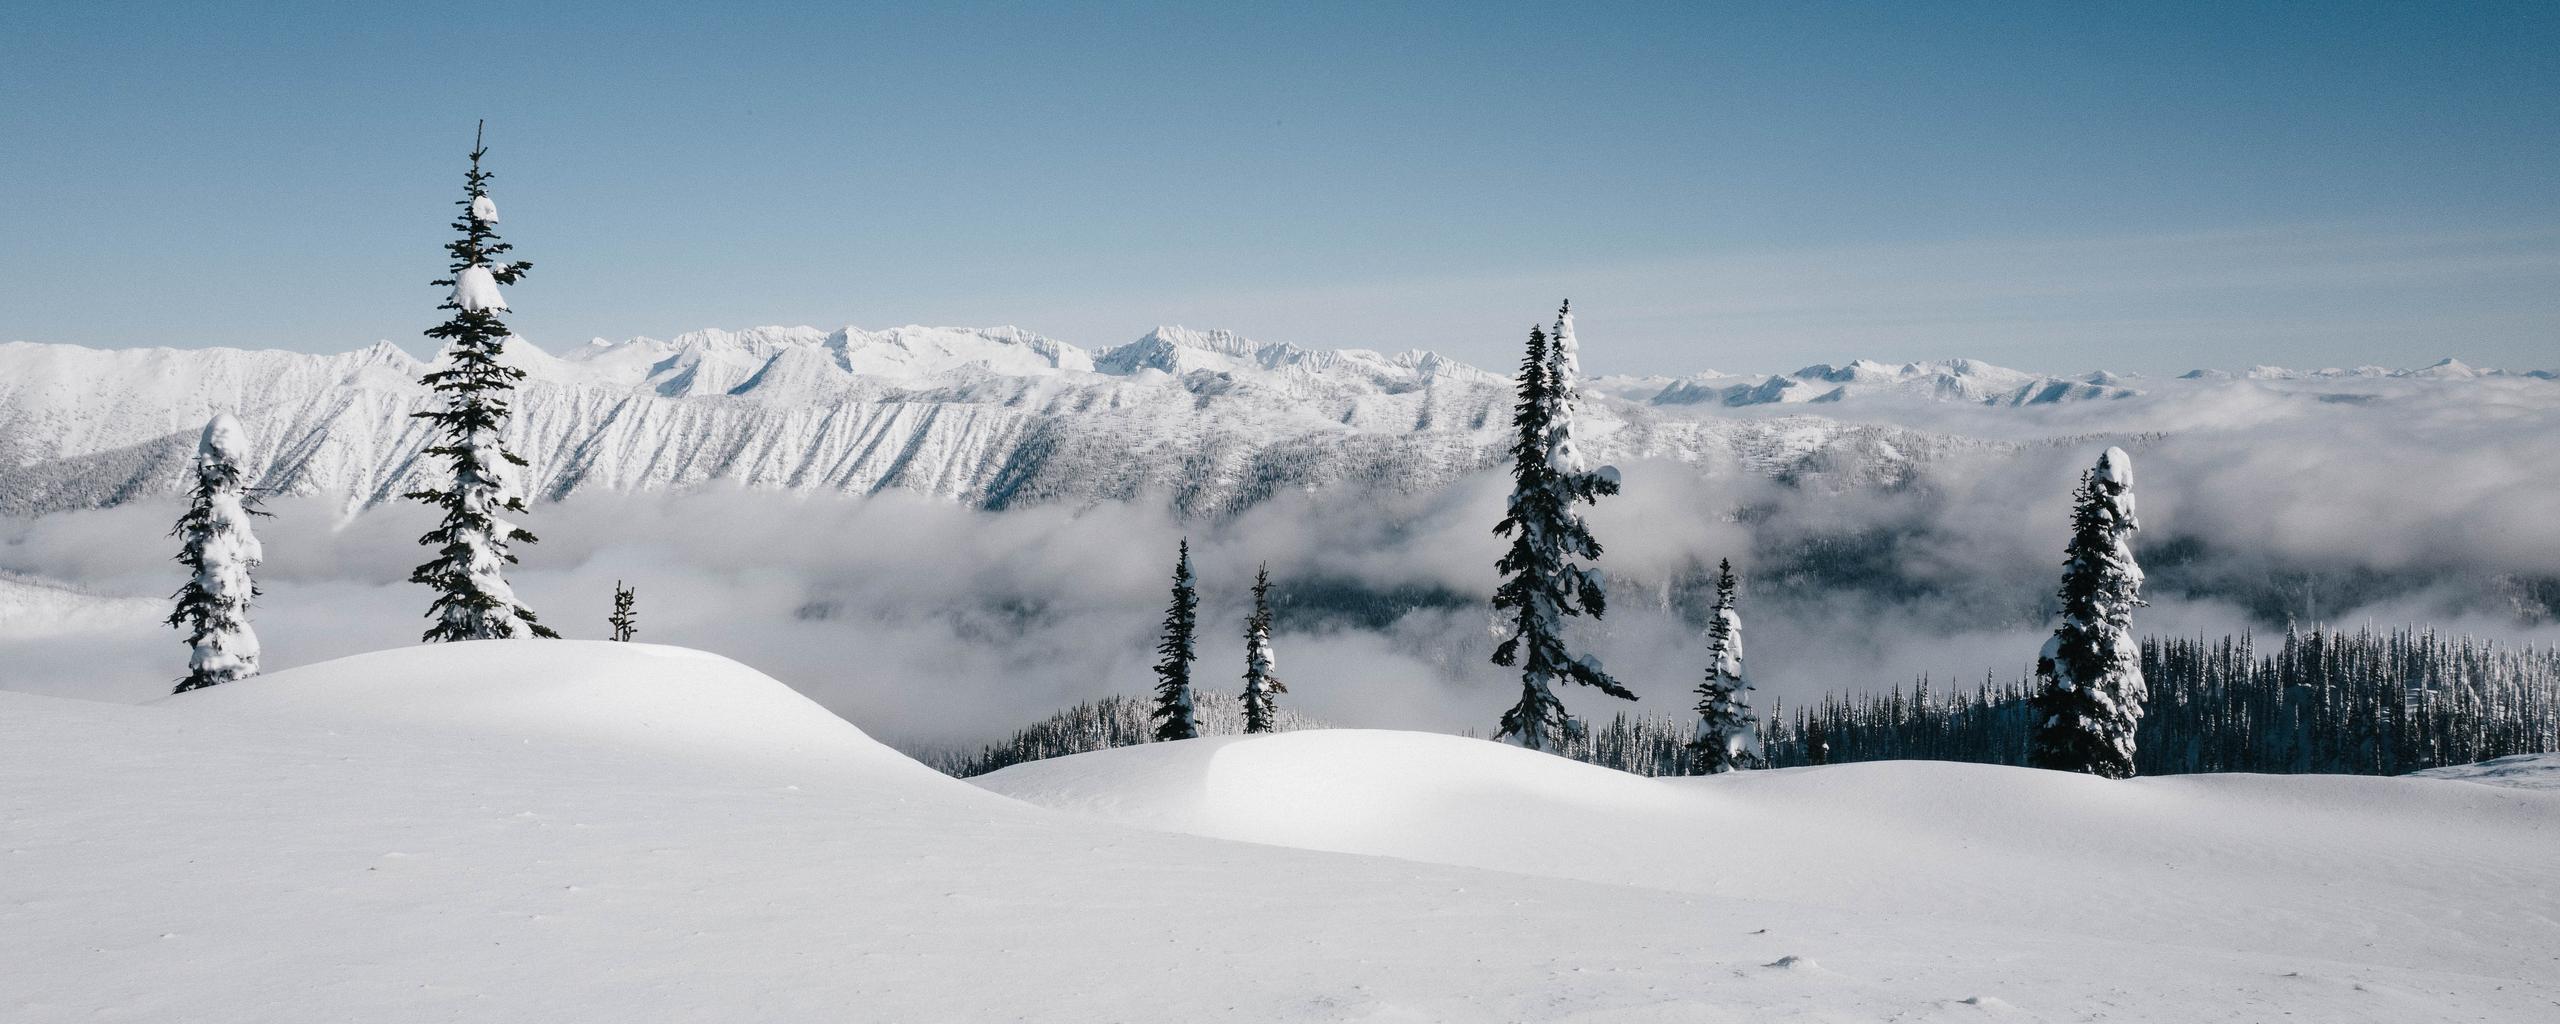 Snowy landscape with blue skies on Bladface Mountain in British Columbia, Canada